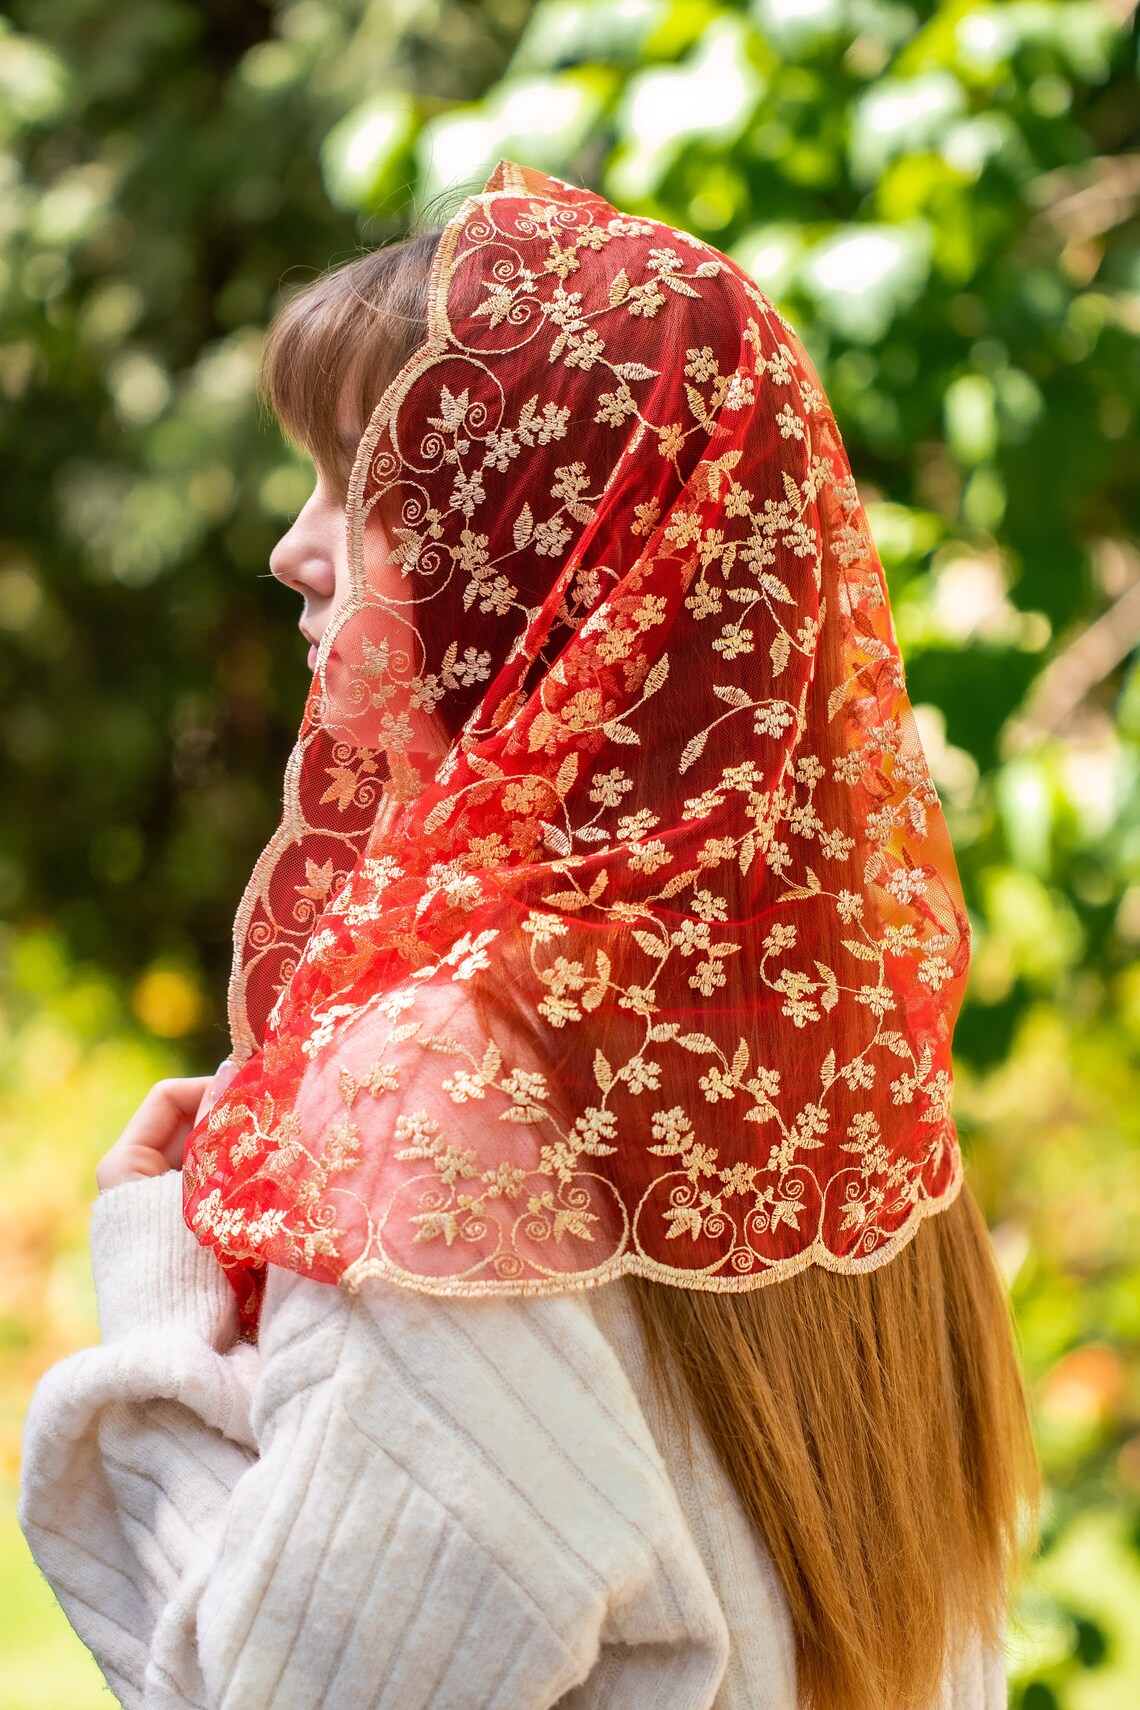 GOLD & RED INFINITY VEIL - MariaVeils